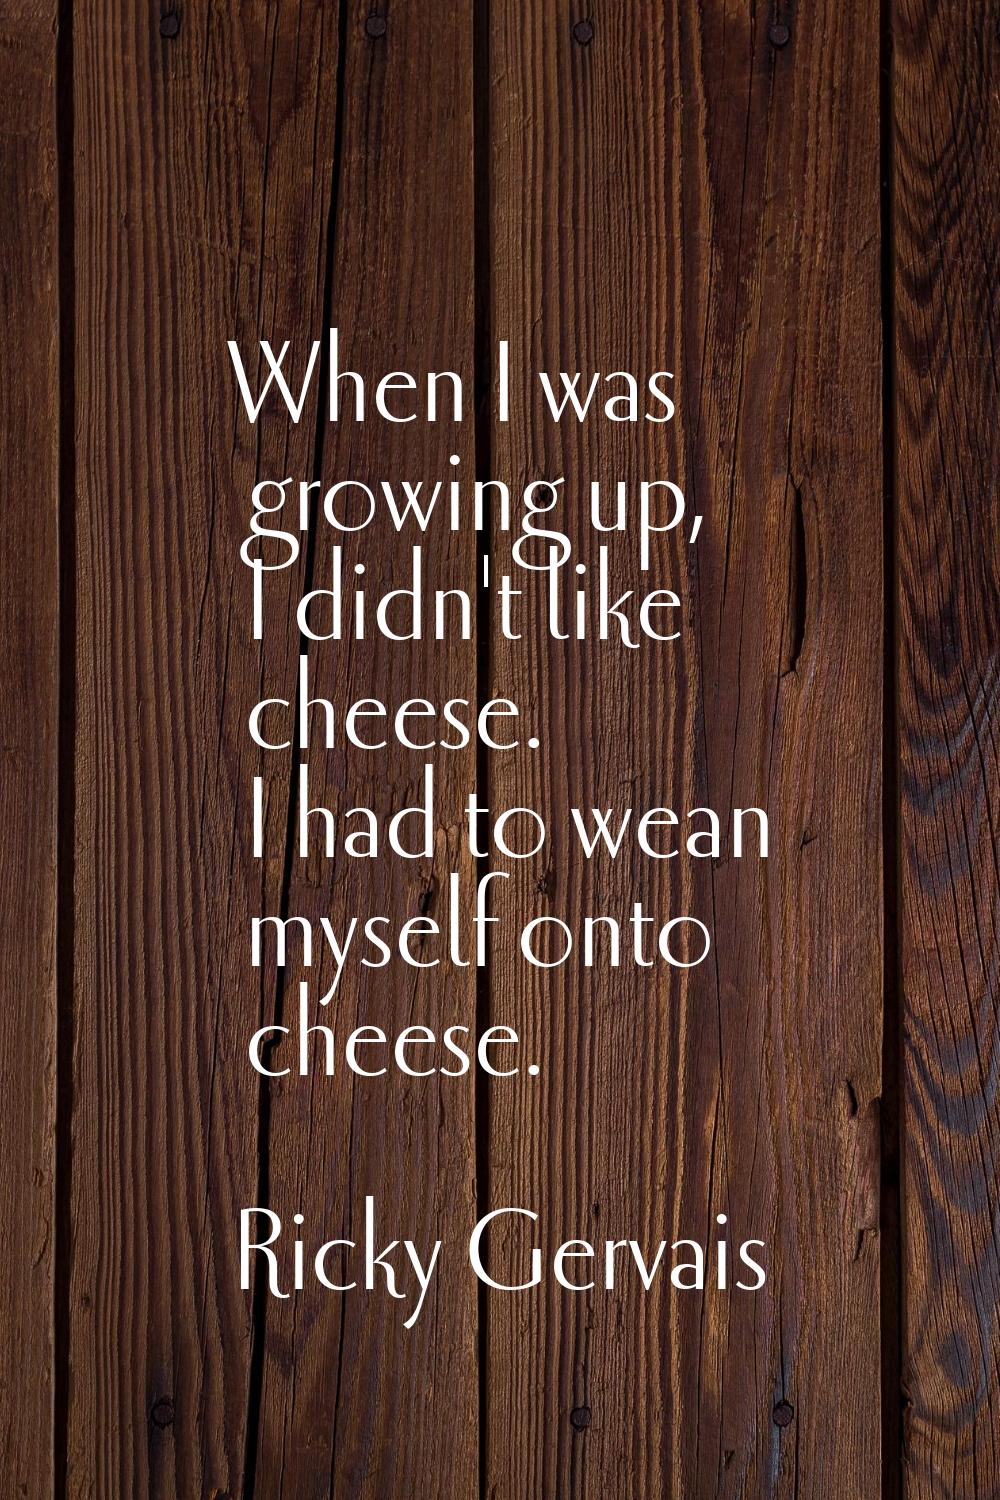 When I was growing up, I didn't like cheese. I had to wean myself onto cheese.